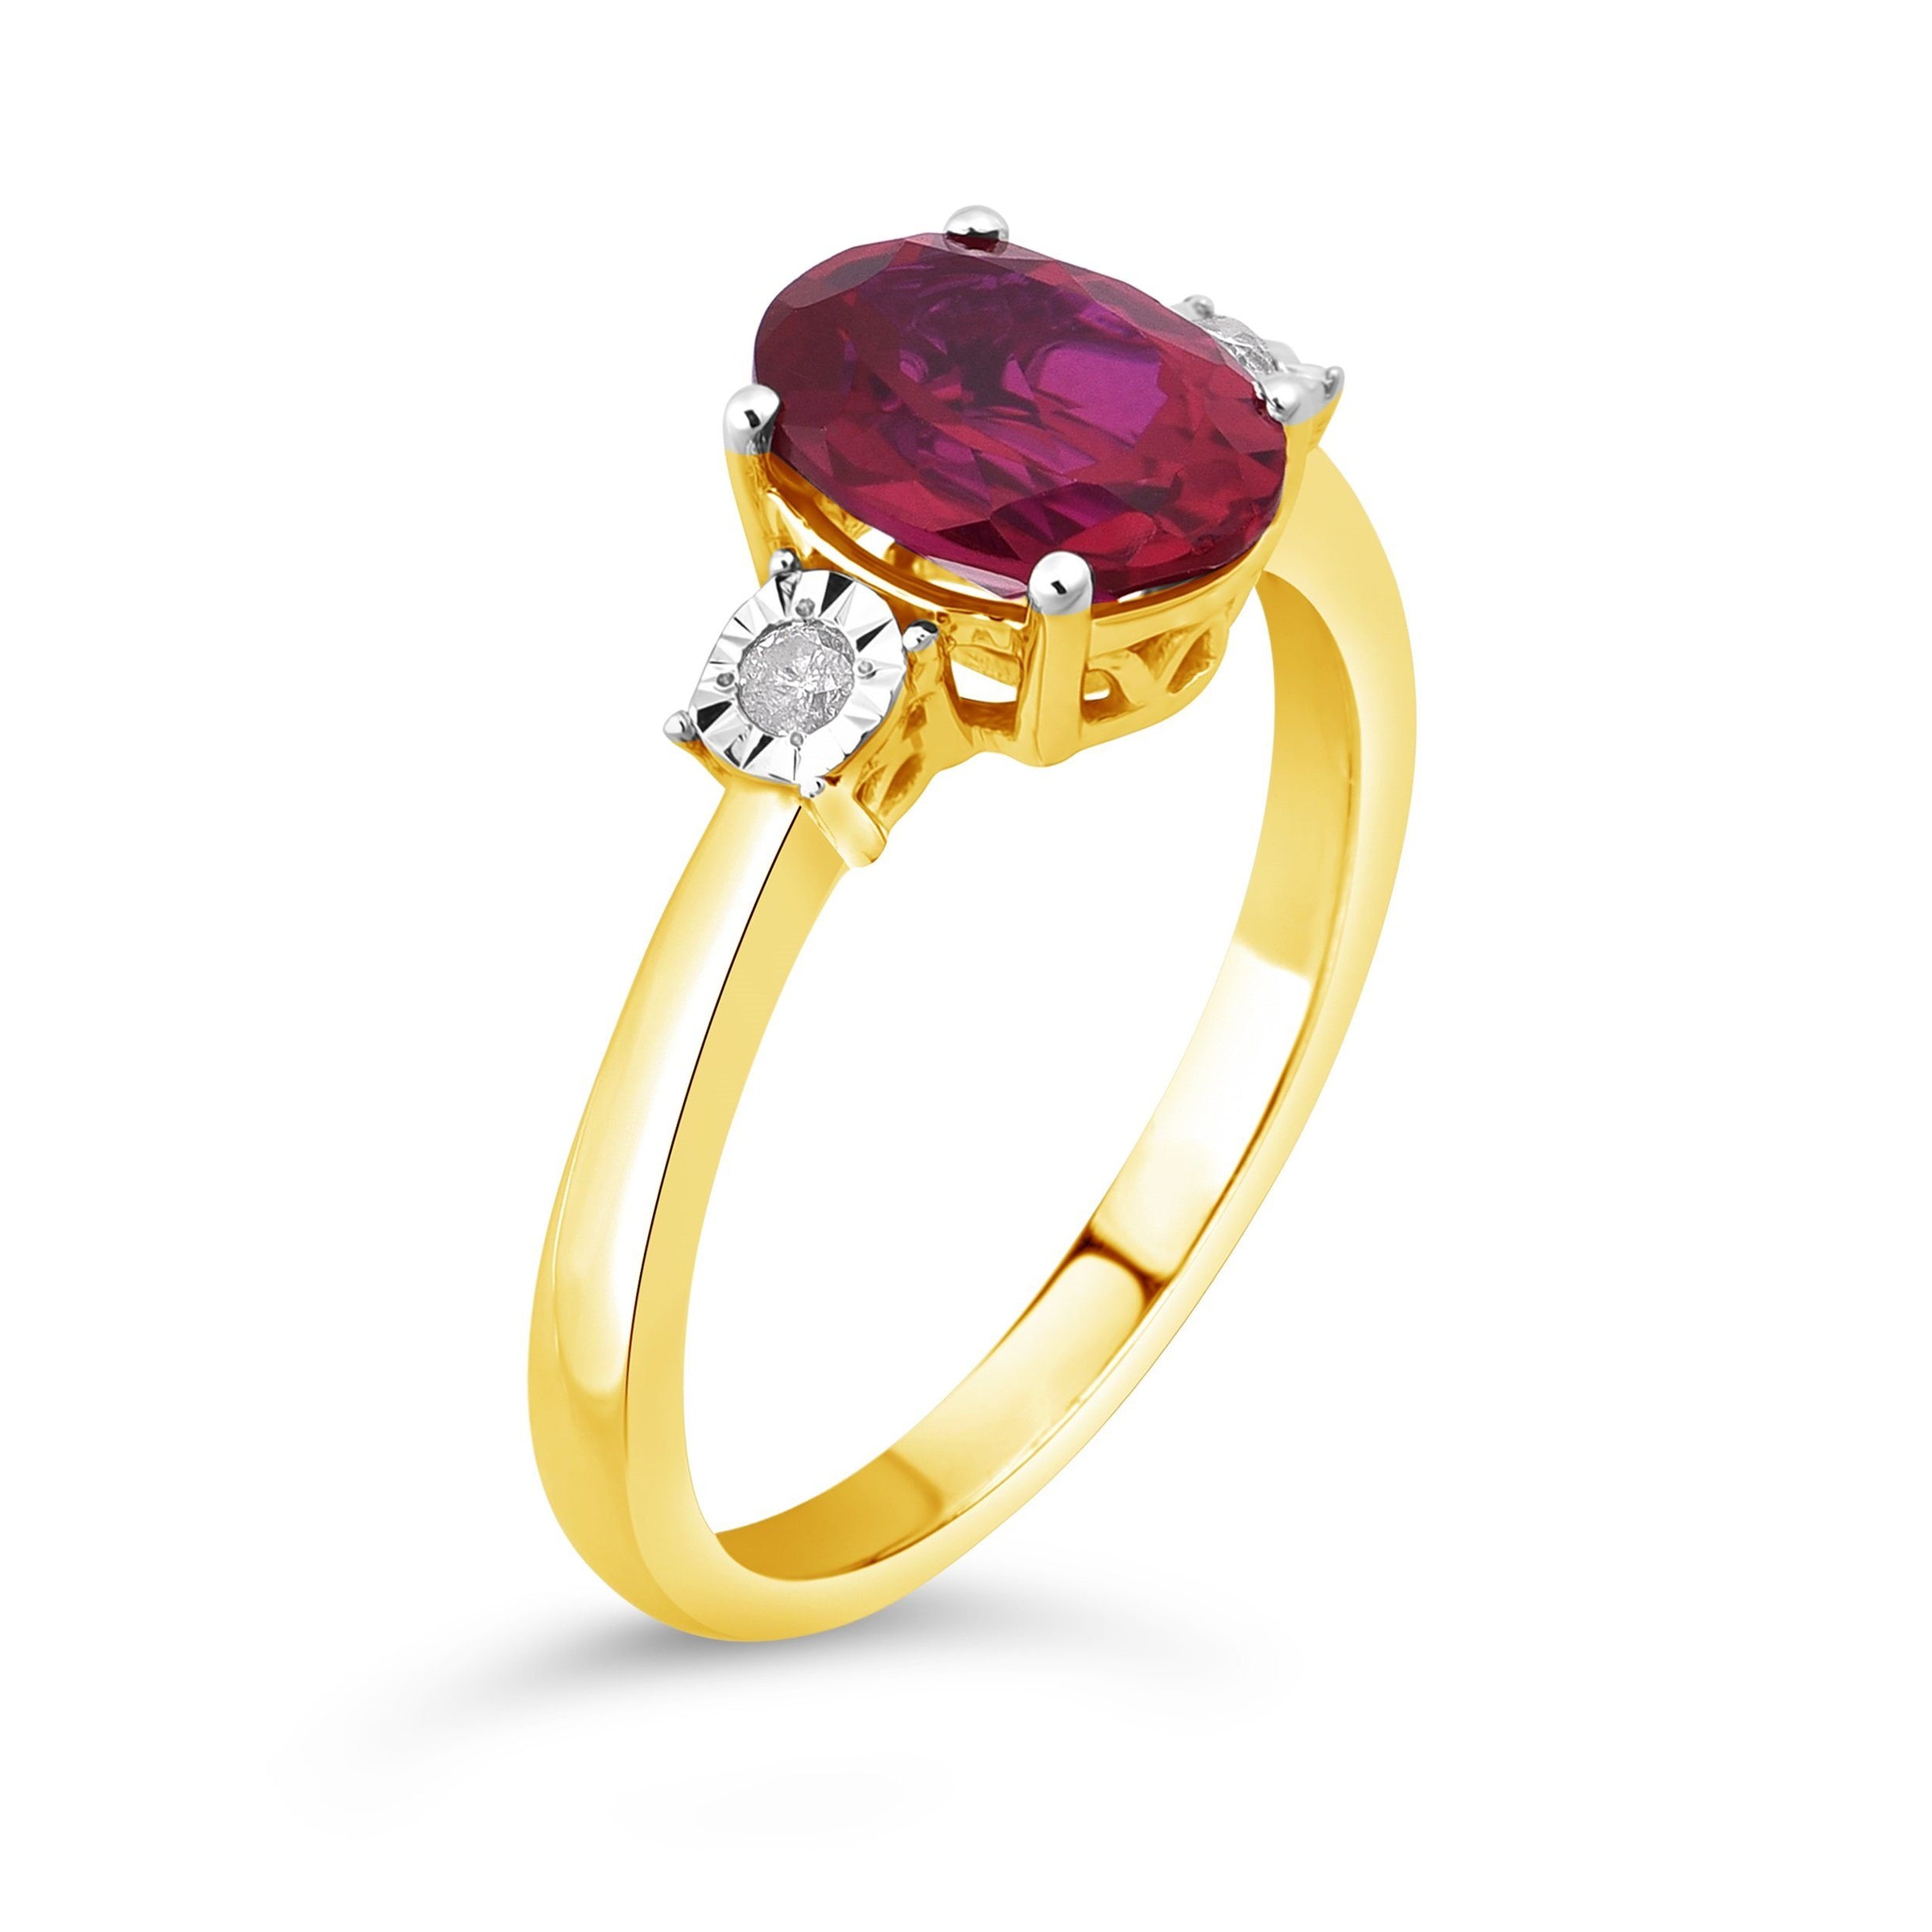 Diamond Set Created Ruby Ring in 9ct Yellow Gold Rings Bevilles 